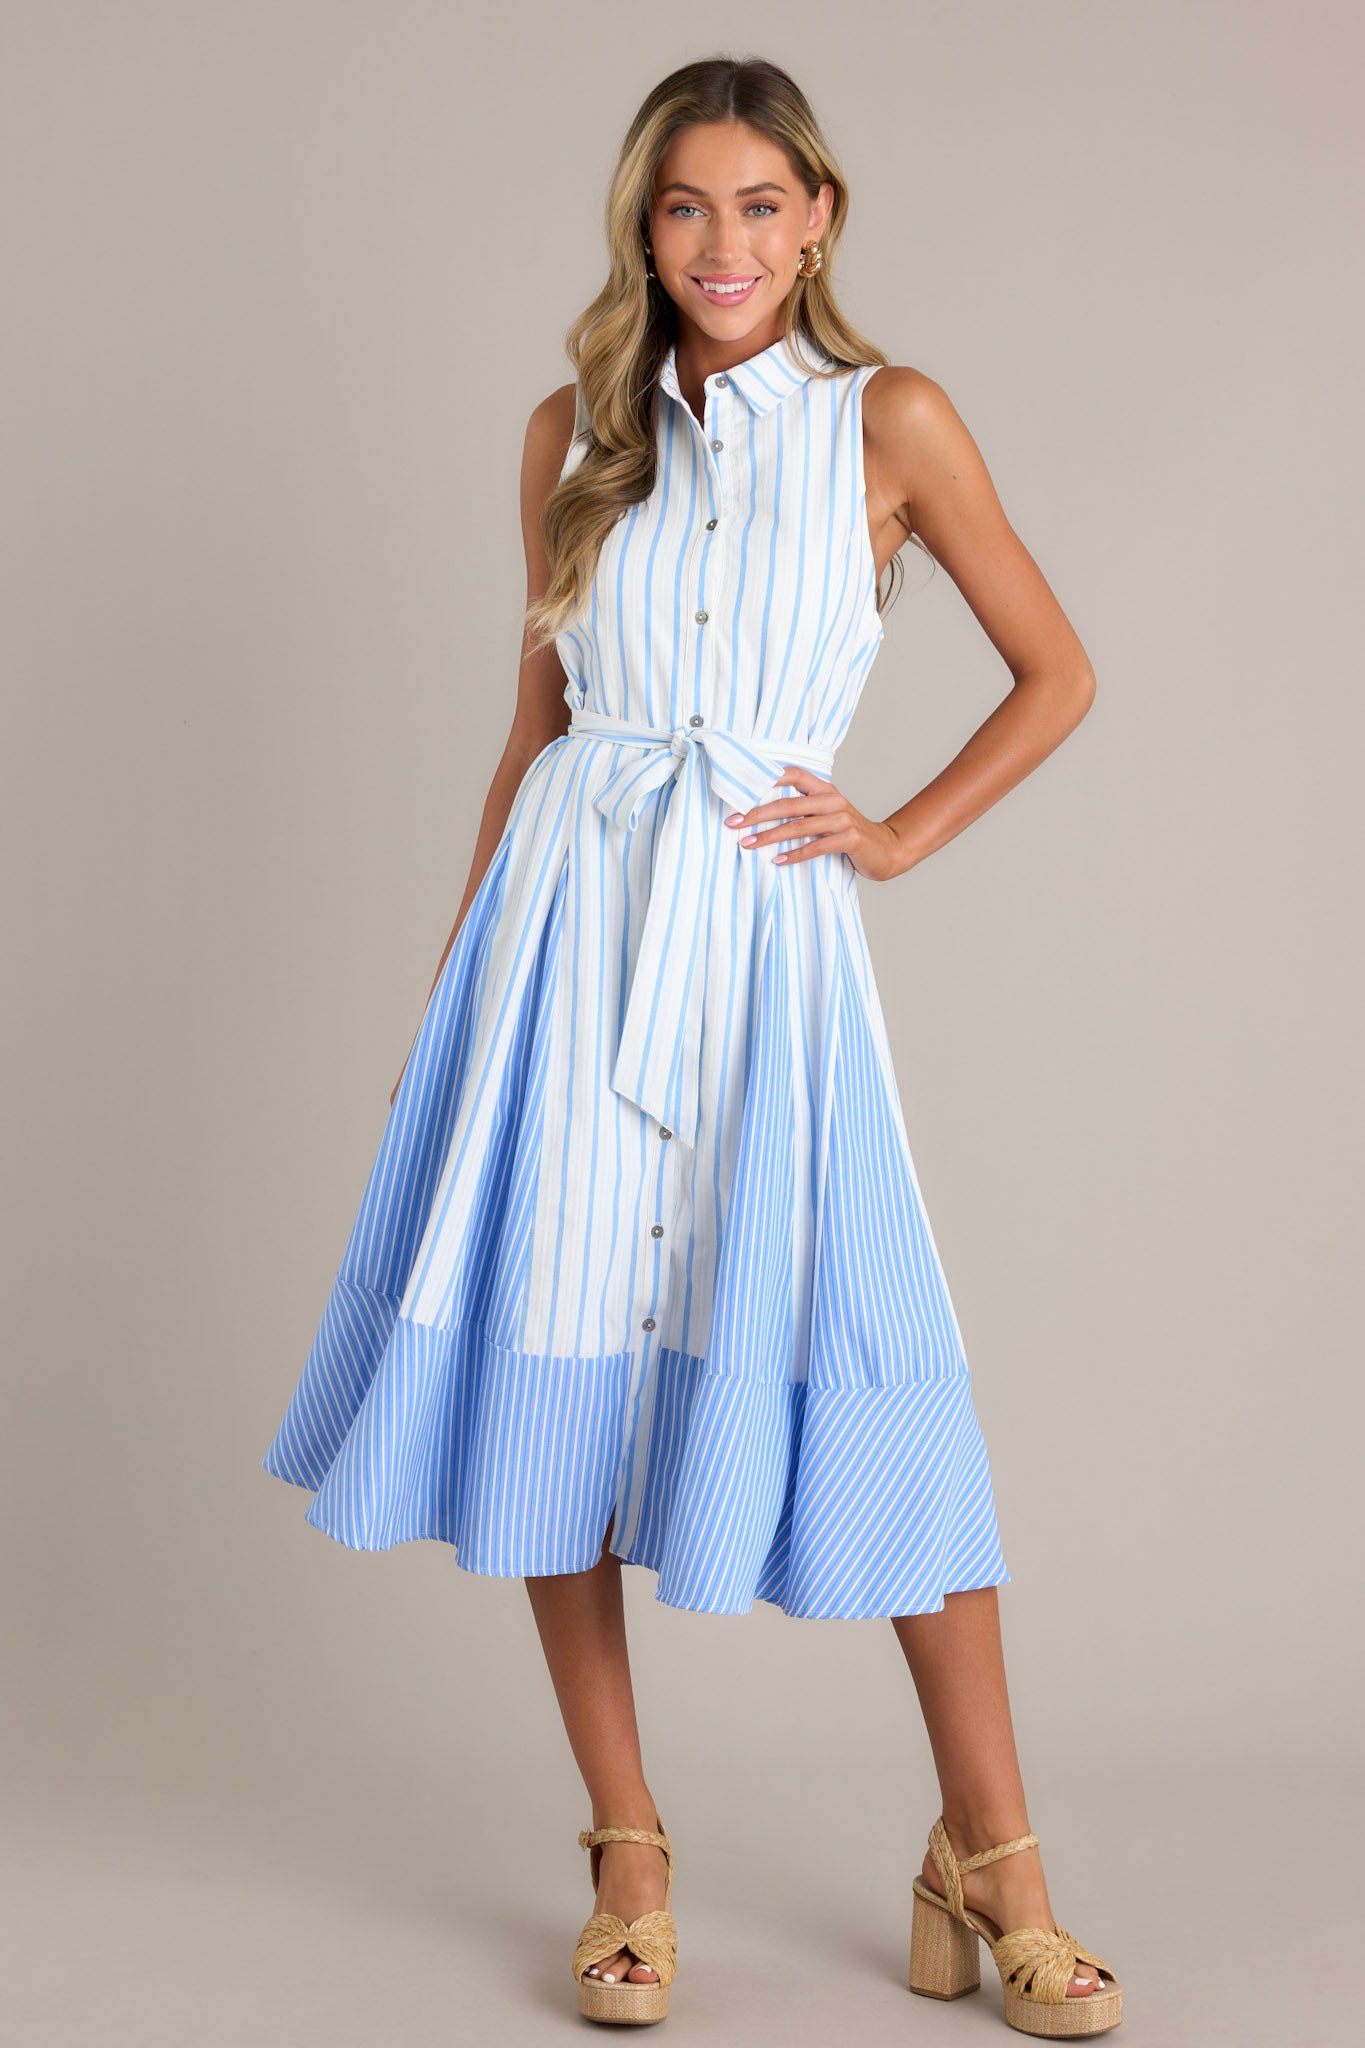 This light blue midi dress features a collared neckline, a functional button front, a self-tie waist belt, a unique stripe pattern, and a flowing silhouette.